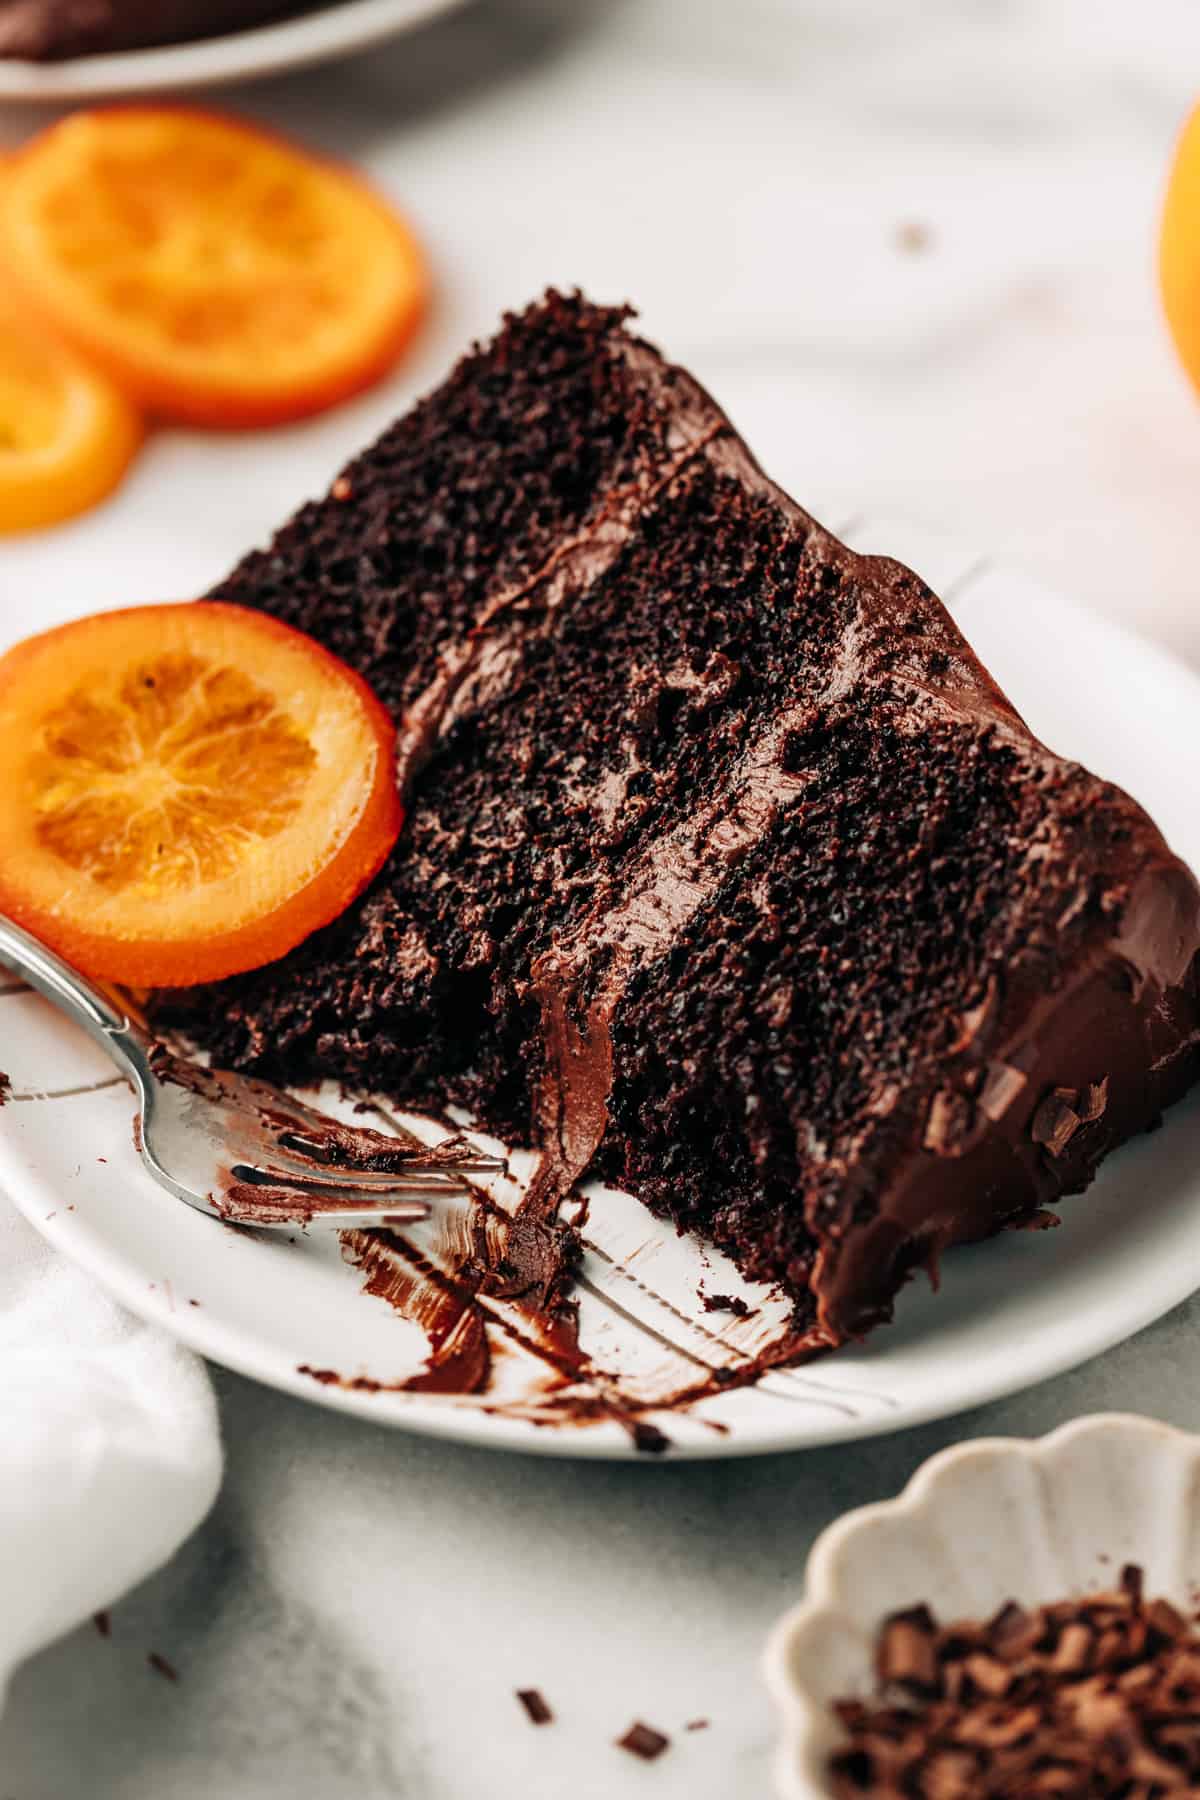 a slice of chocolate orange cake on a plate with a candied orange.